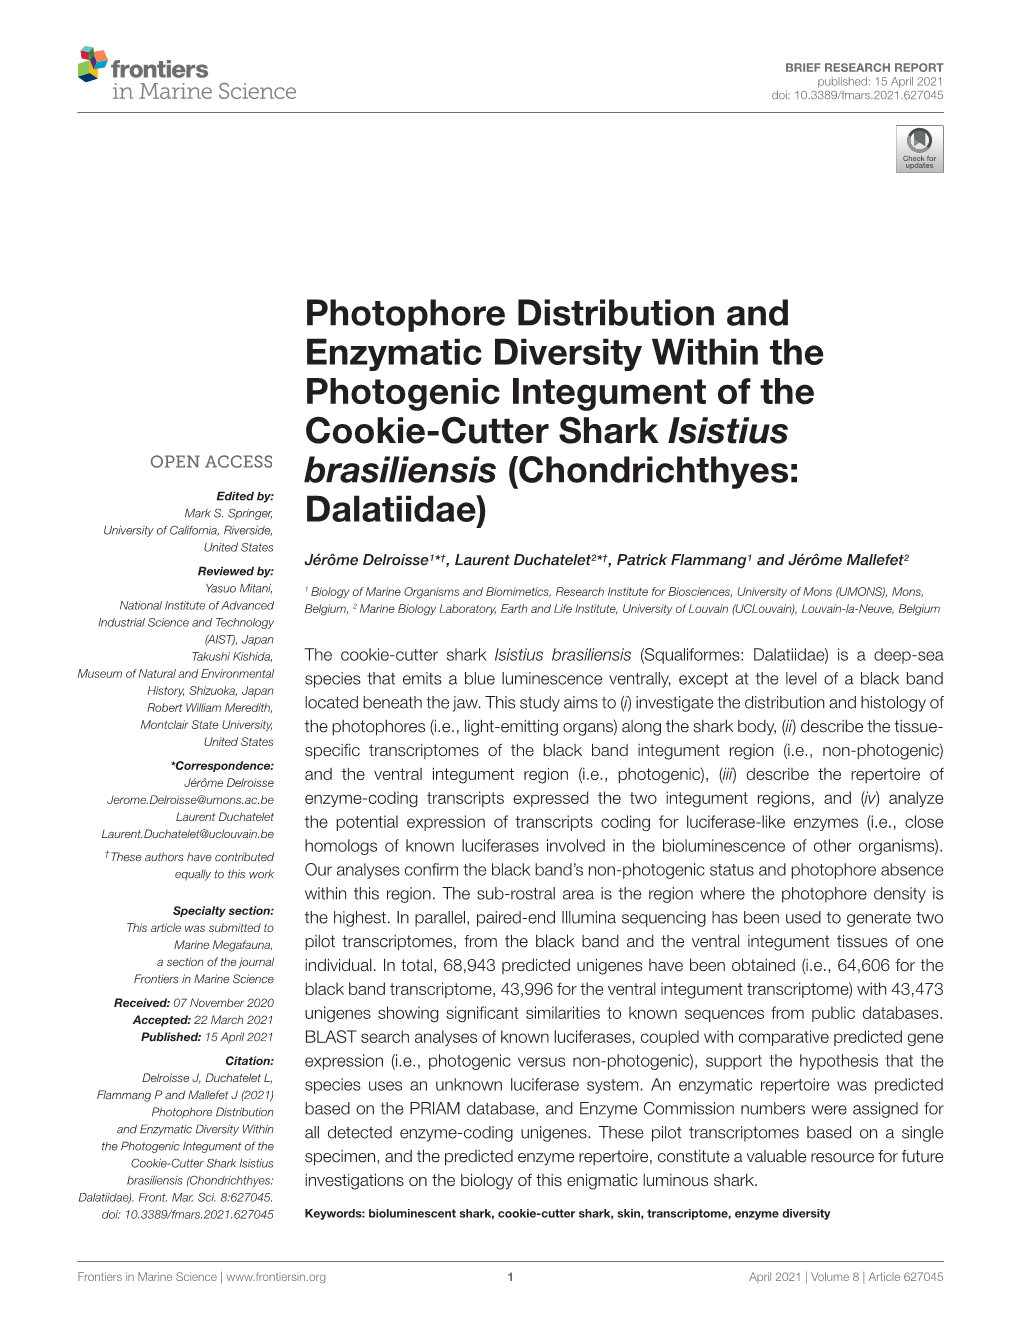 Photophore Distribution and Enzymatic Diversity Within the Photogenic Integument of the Cookie-Cutter Shark Isistius Brasiliensis (Chondrichthyes: Edited By: Mark S